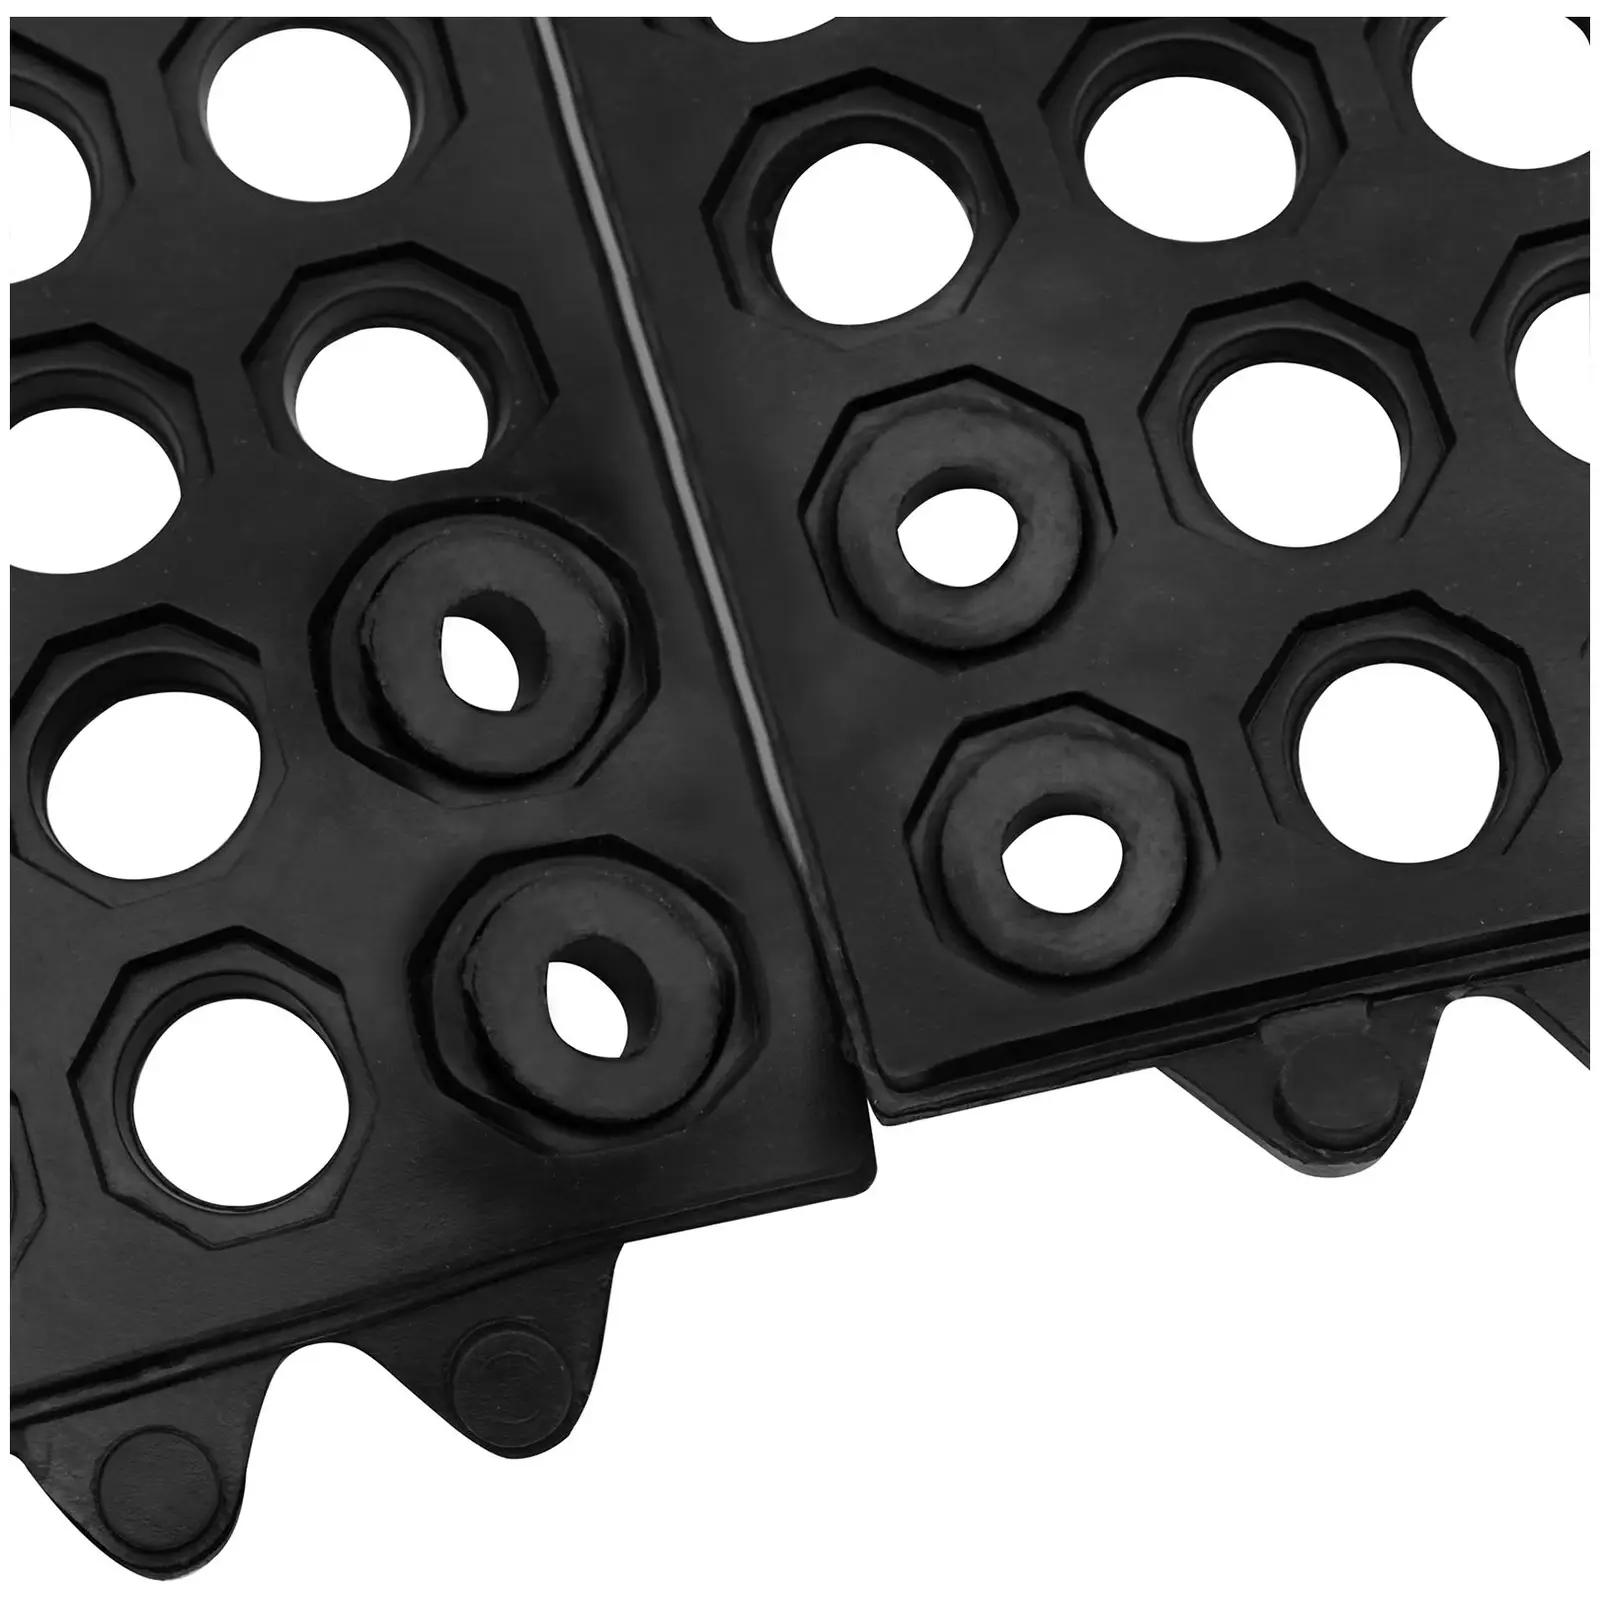 Connecting pieces - for ring rubber mat 10050280